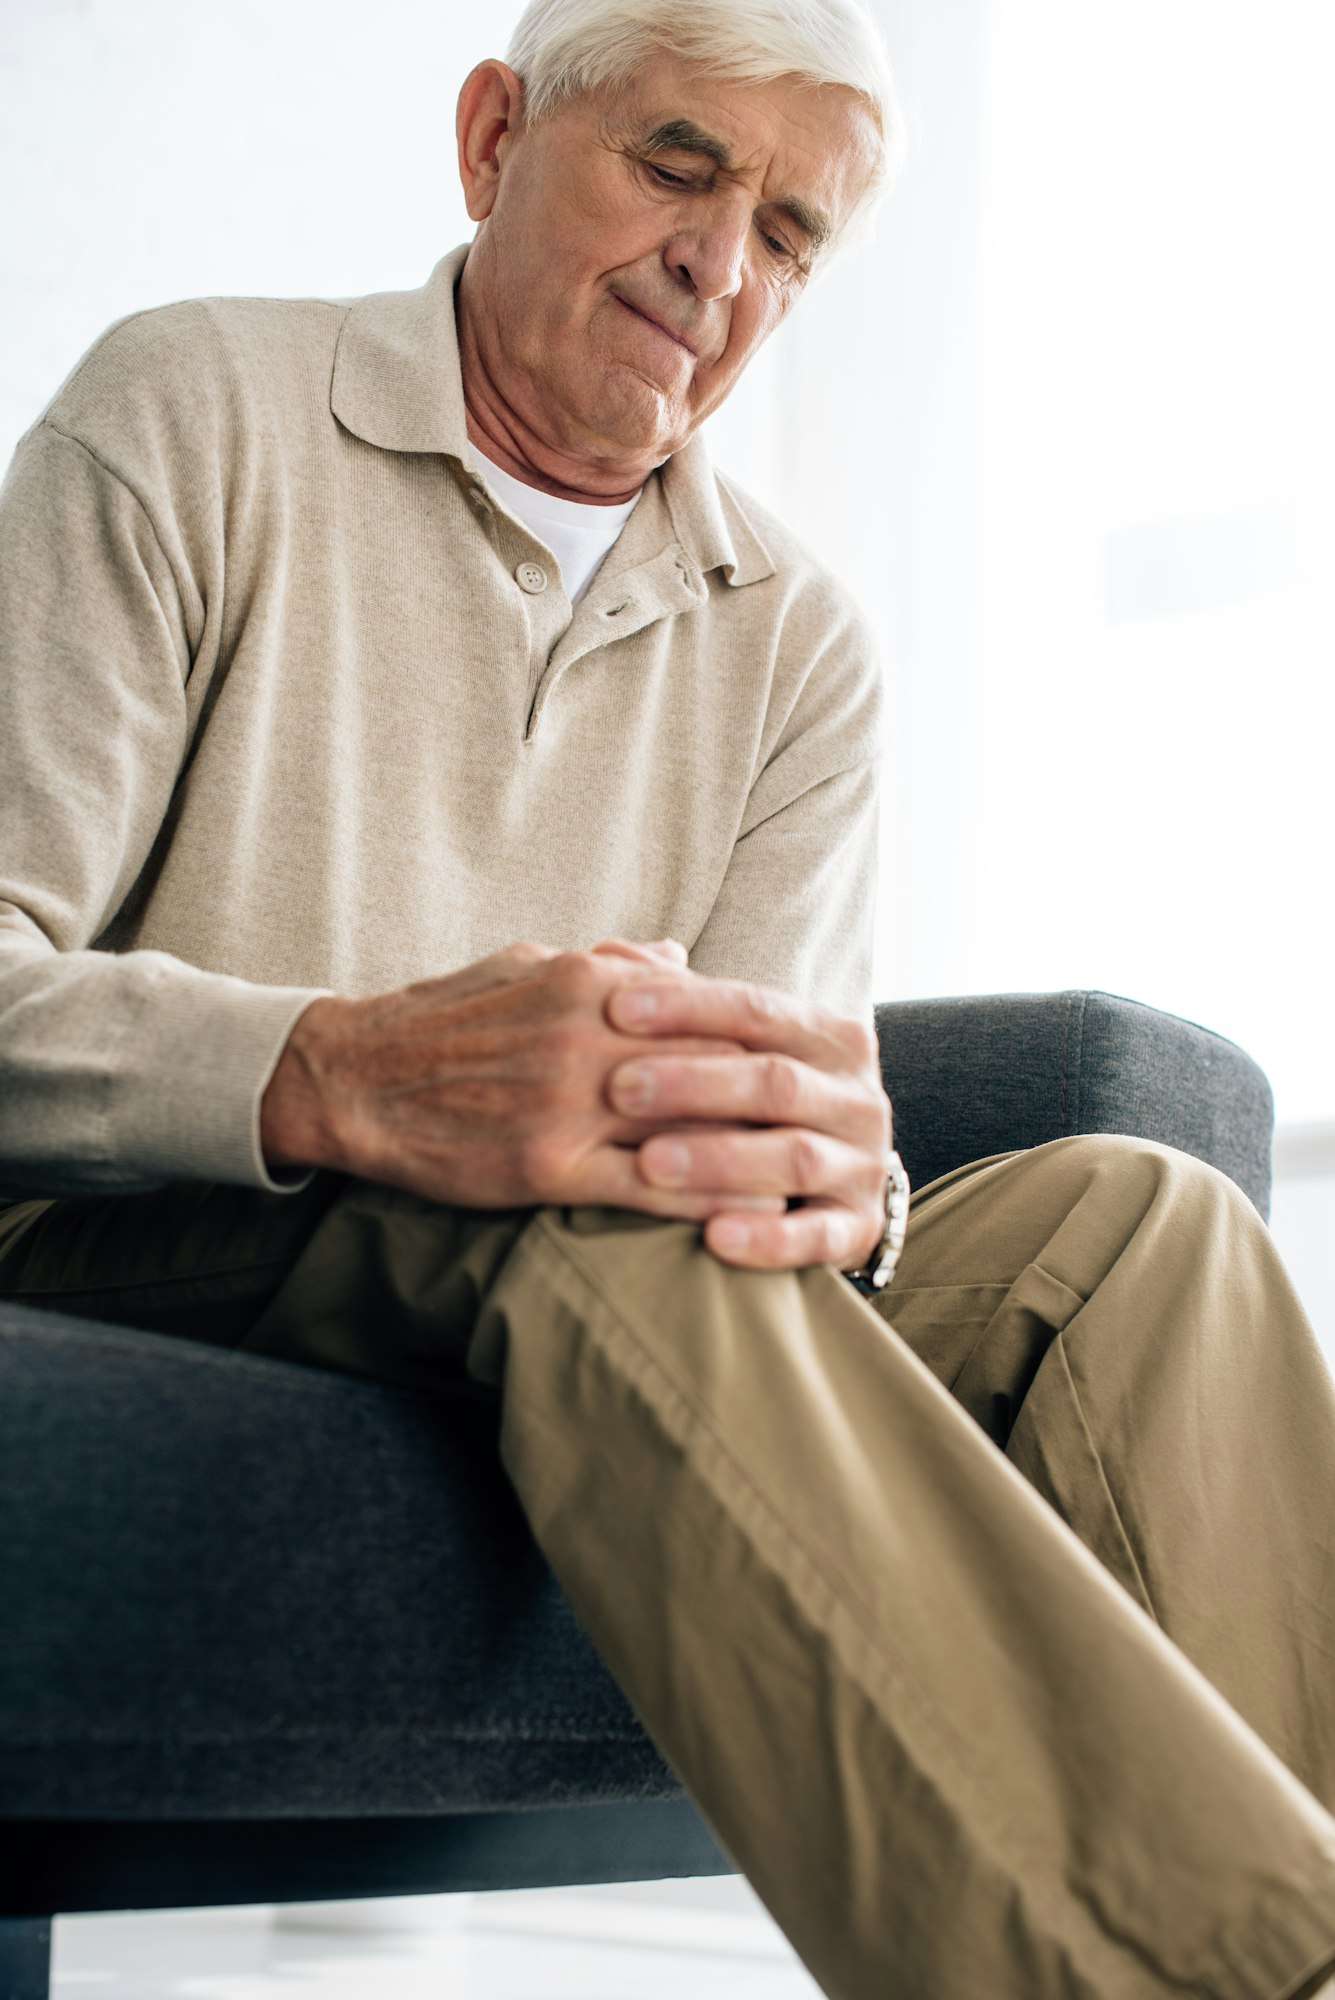 low angle view of senior man sitting on sofa and having knee Arthritis in apartment